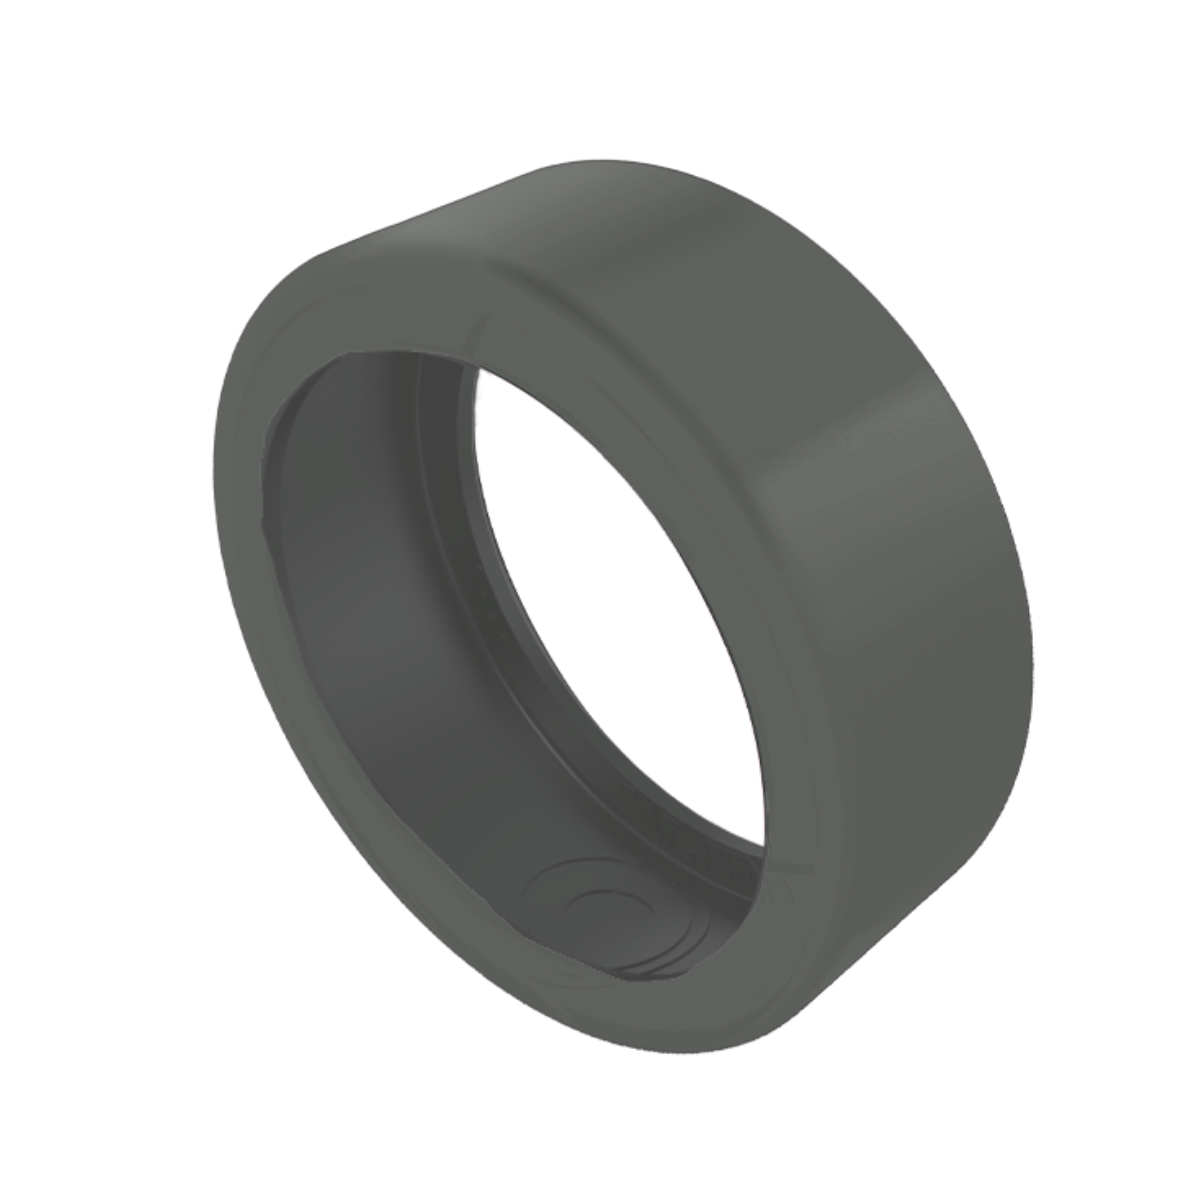 Oura Ring Protection Cover - OSleeve Slate Gray